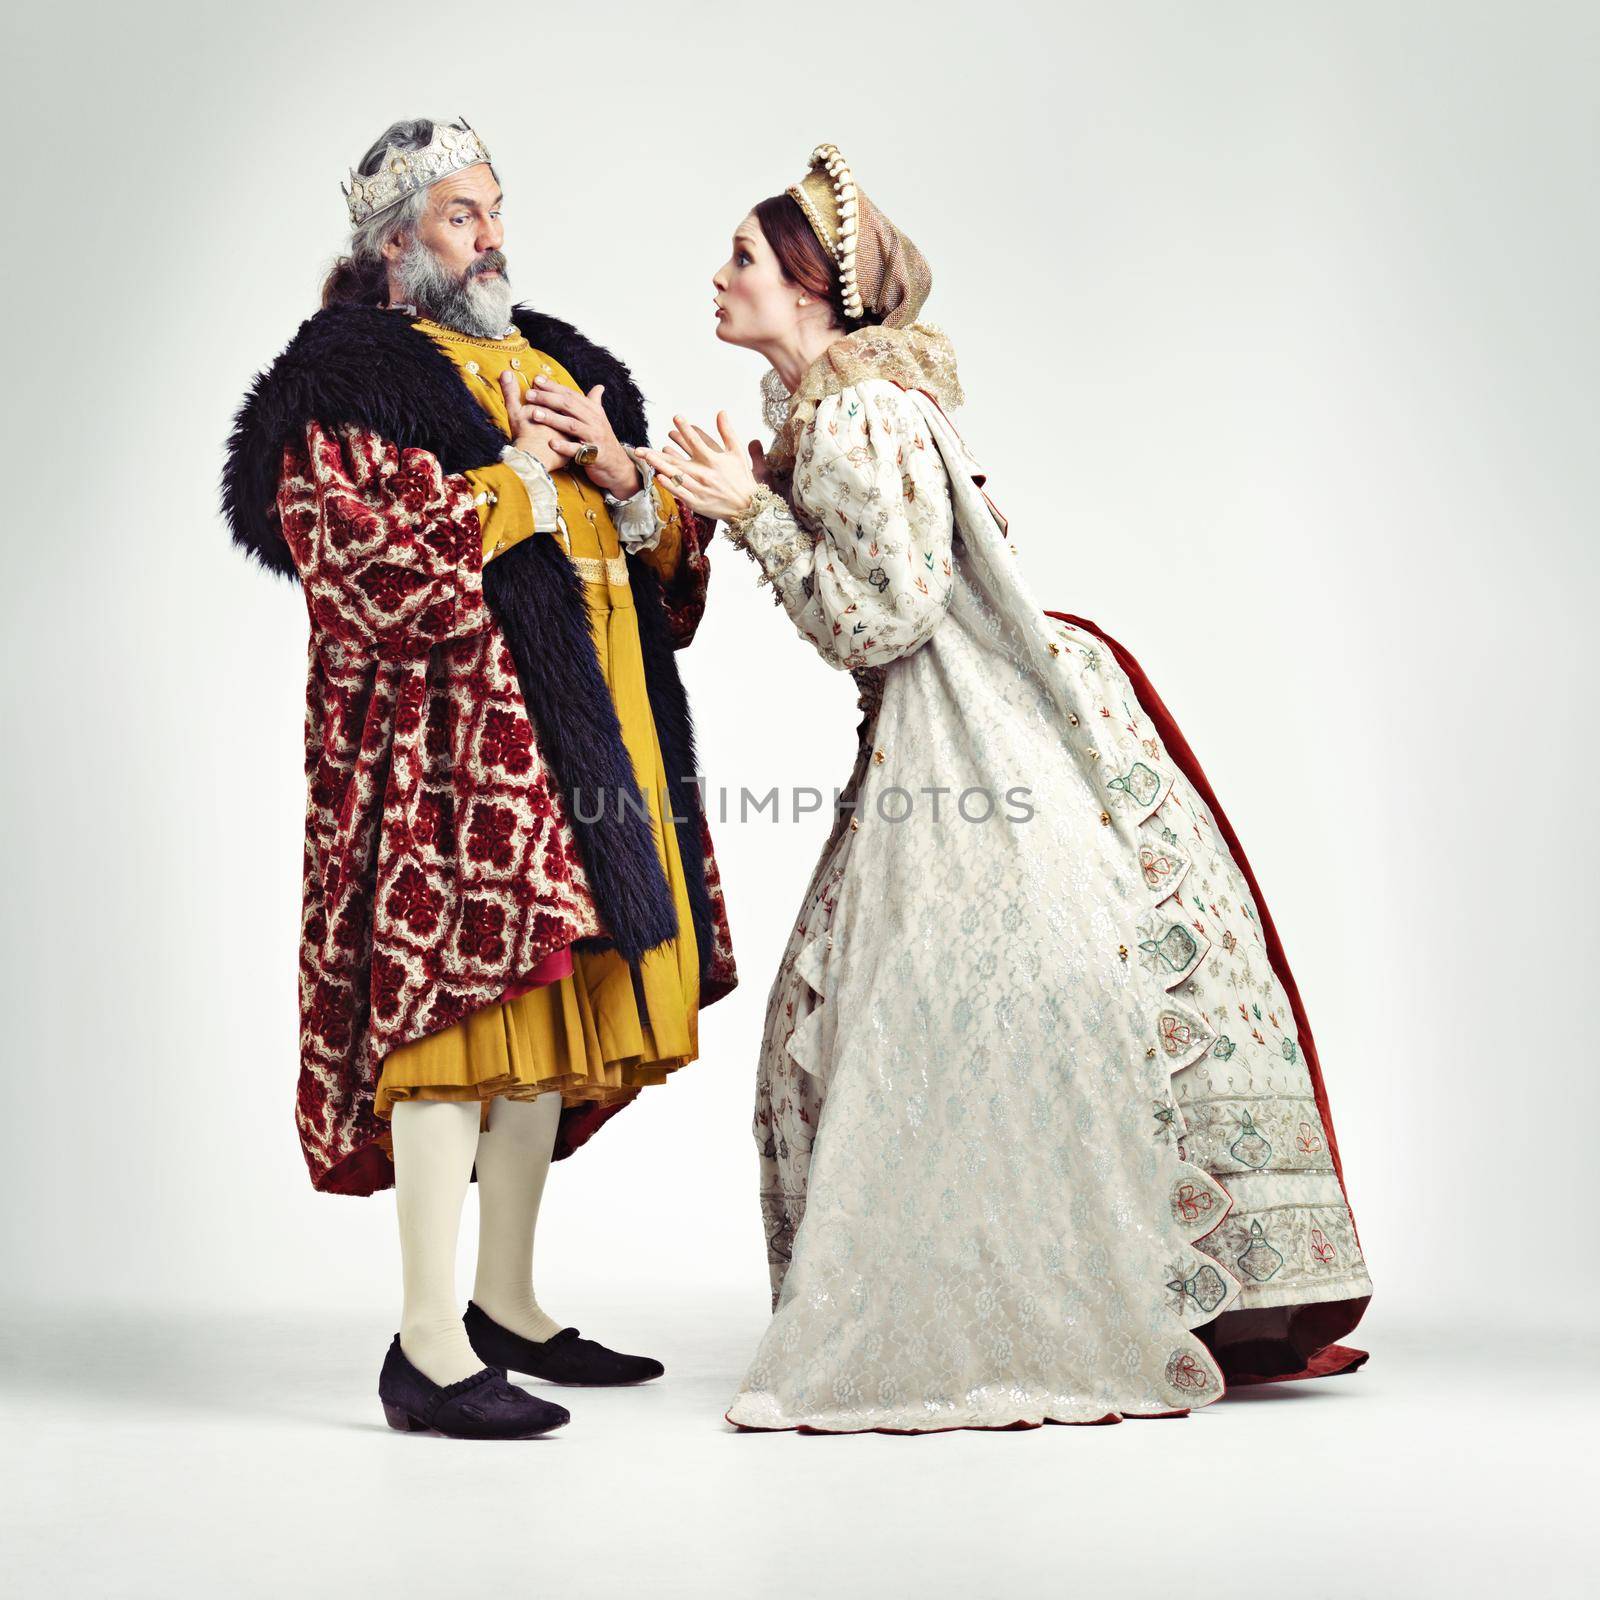 Studio shot of a king and queen arguing